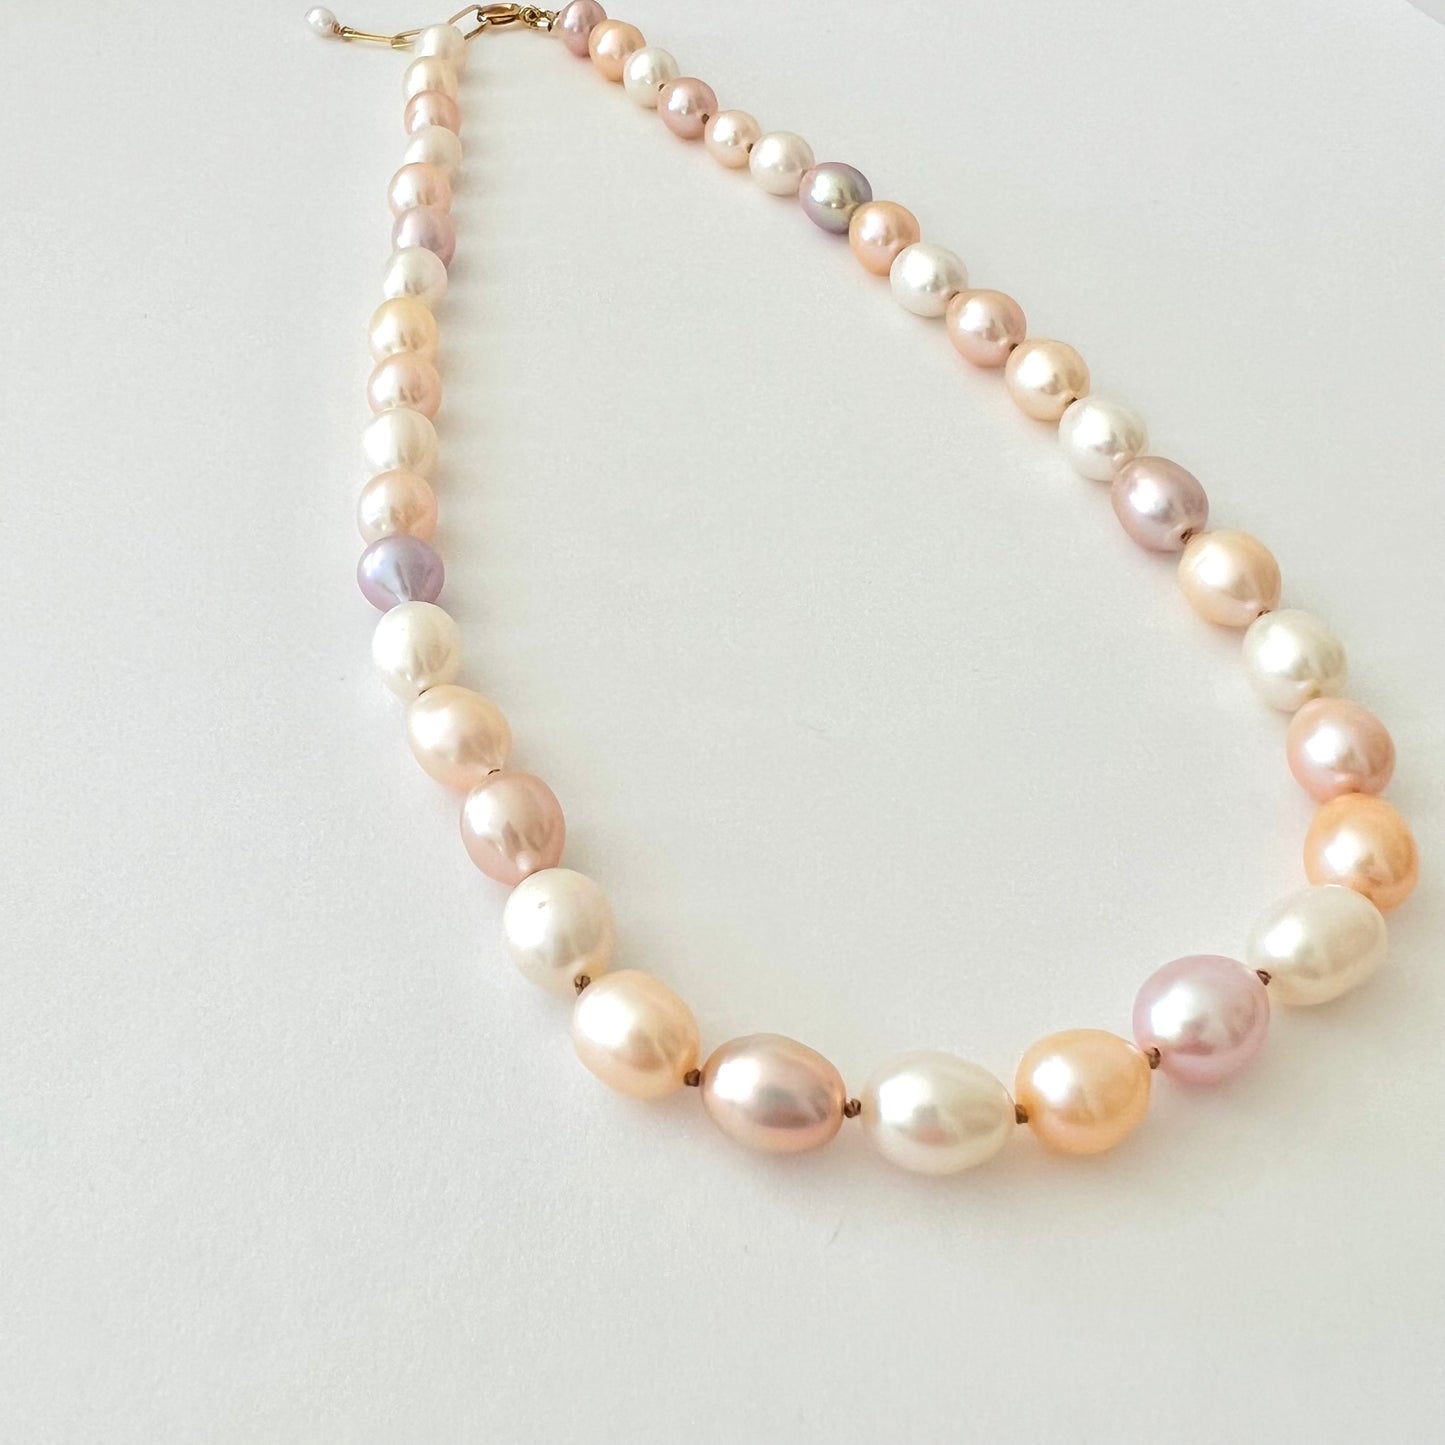 Elizabeth knotted pearl necklace